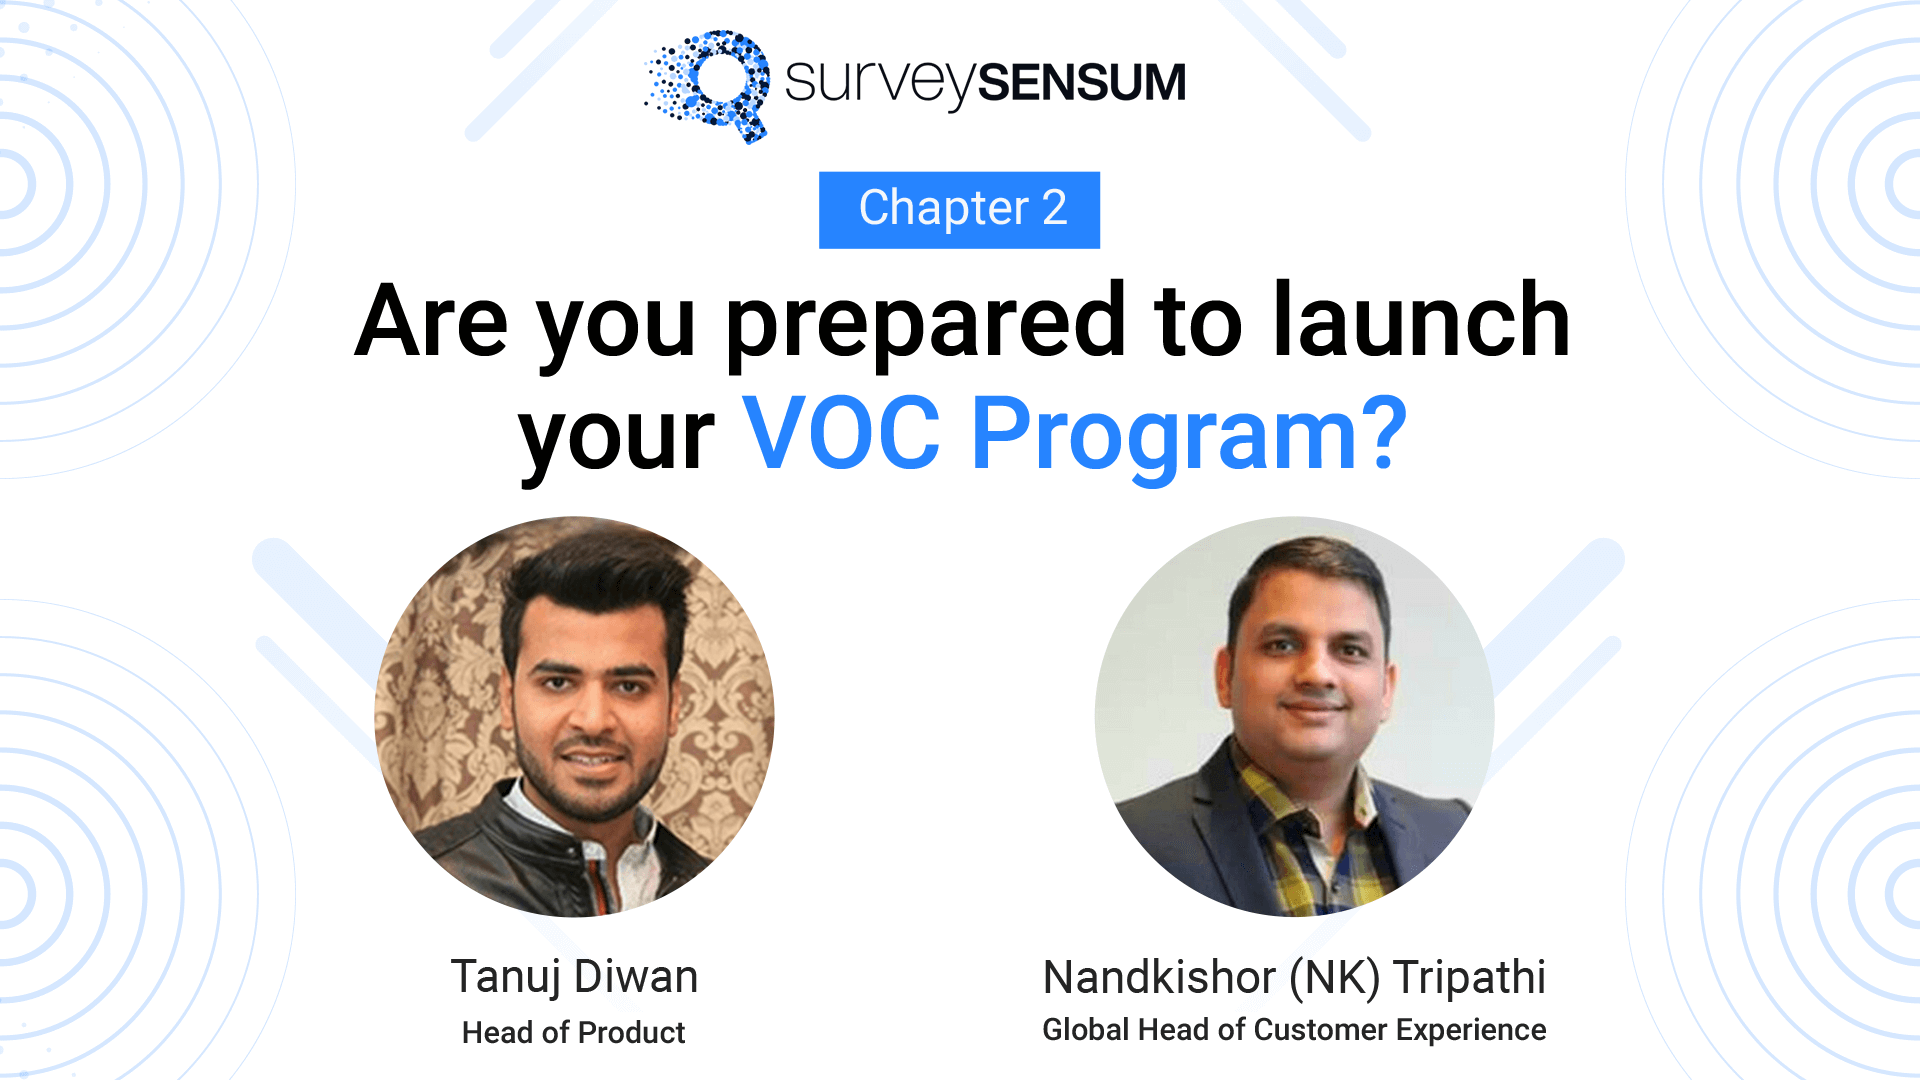 Are you prepared to launch your VOC program